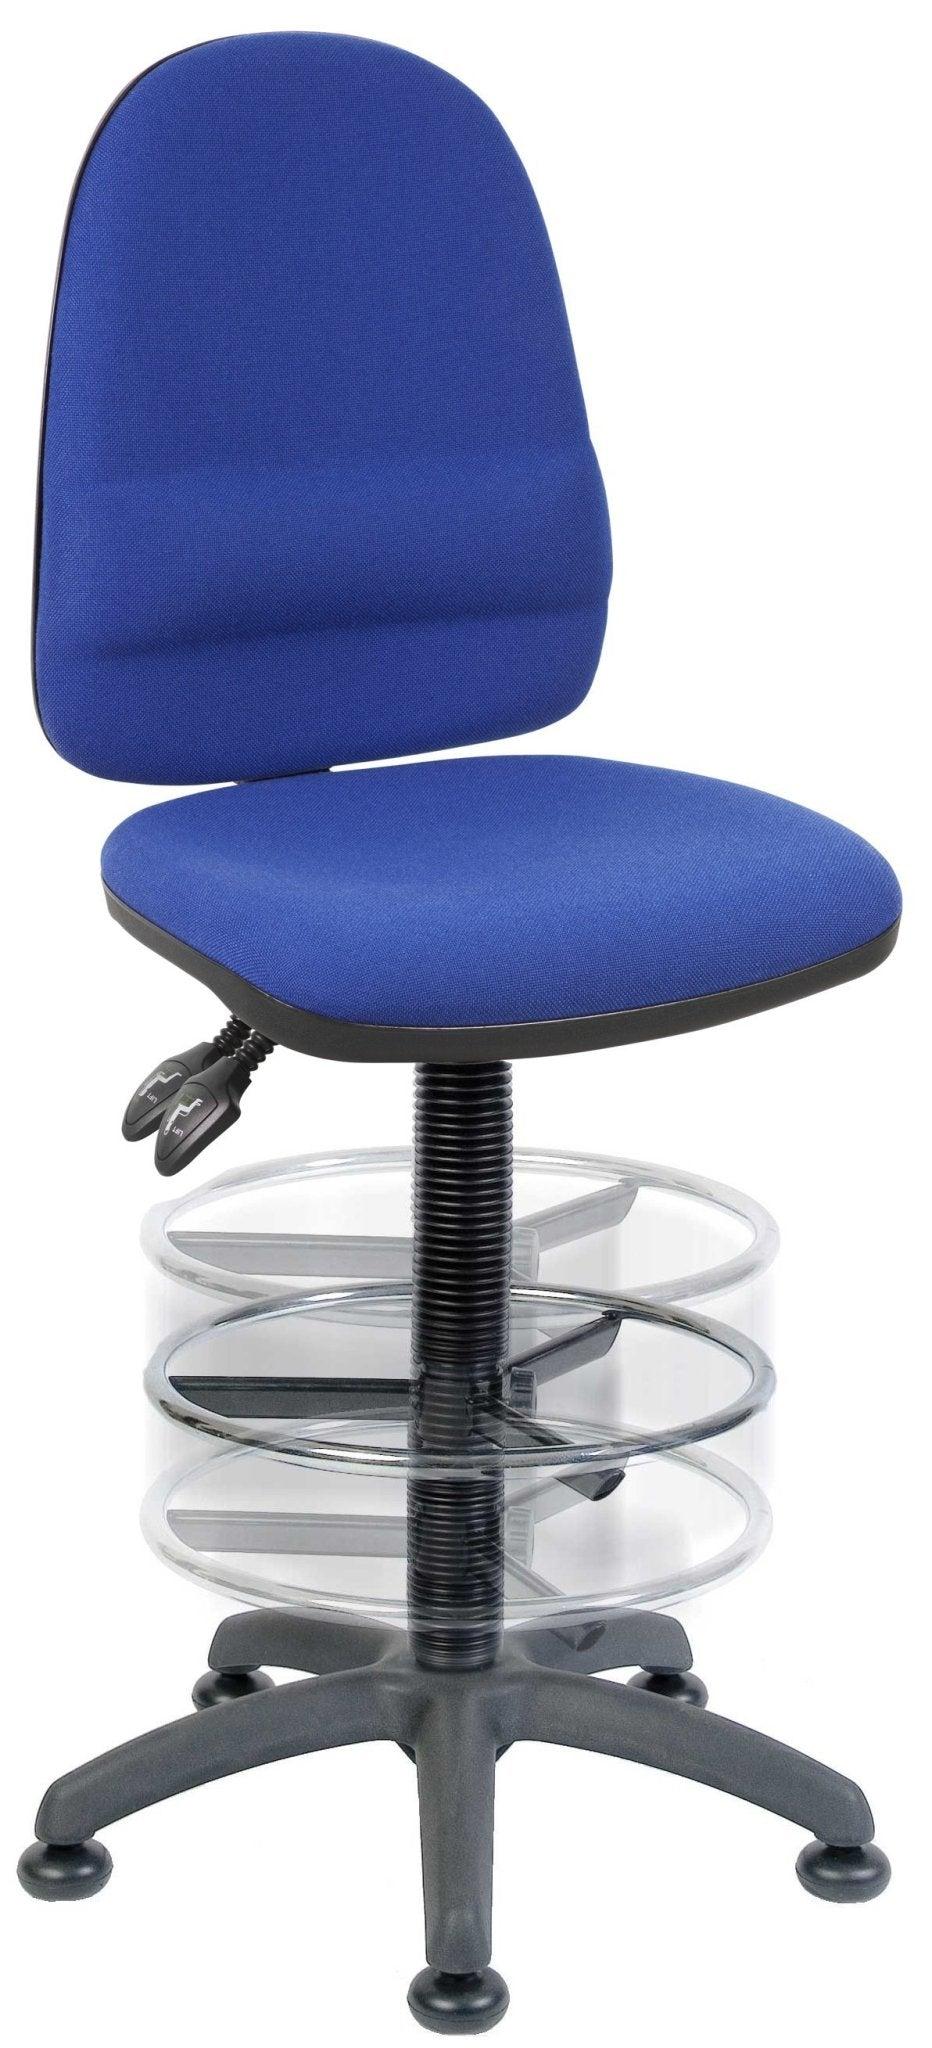 Deluxe draughter ergo twin office chair (blue) - crimblefest furniture - image 1